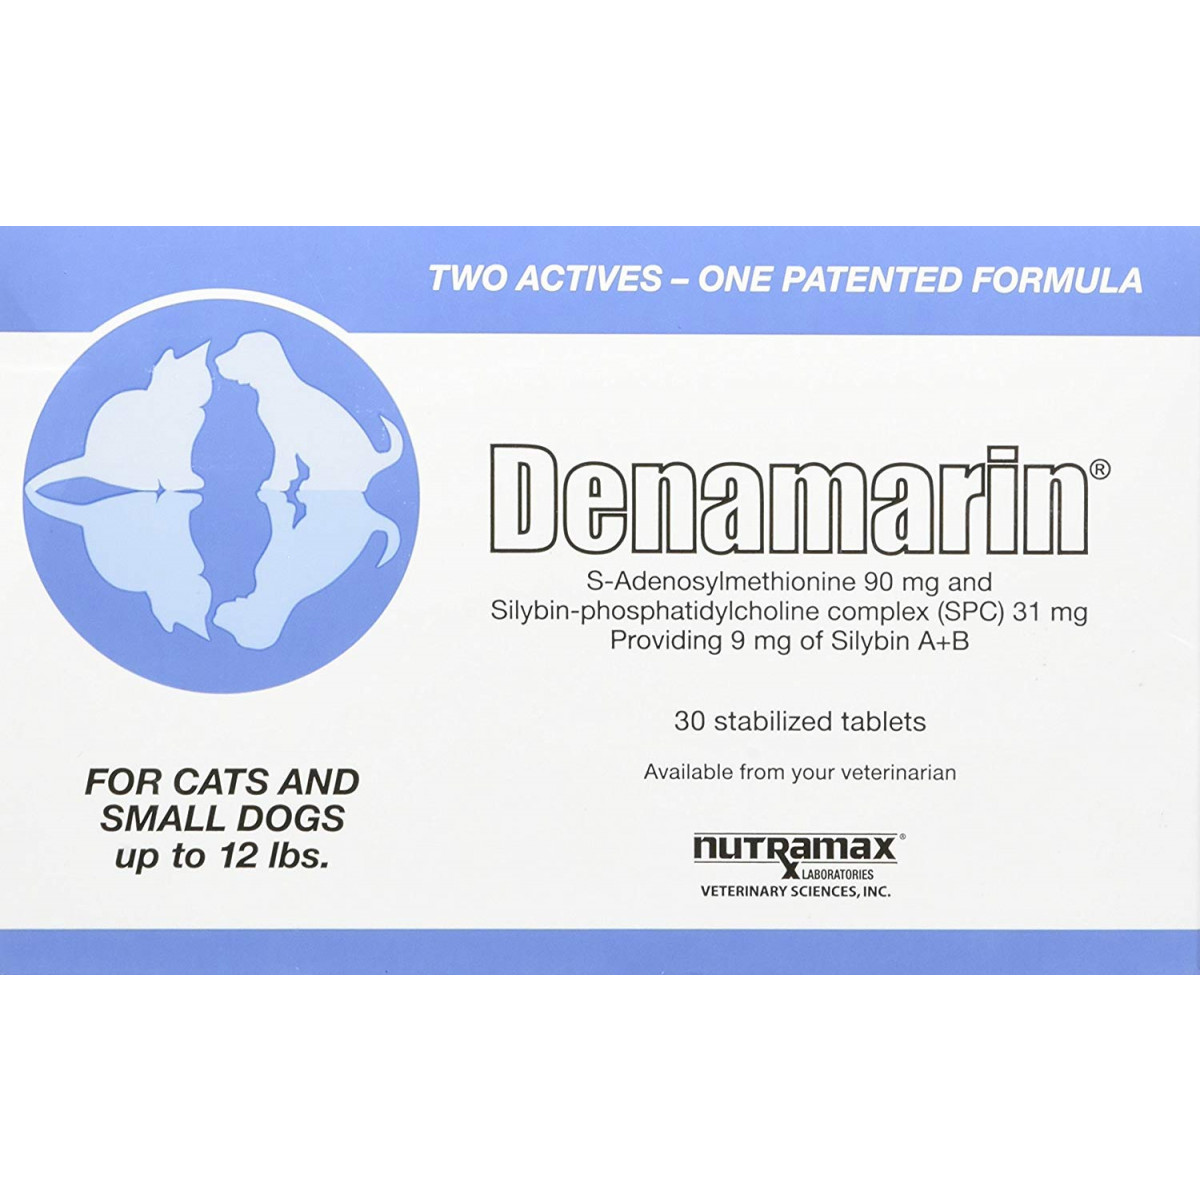 nutramax-denamarin-tablets-for-cats-and-dogs